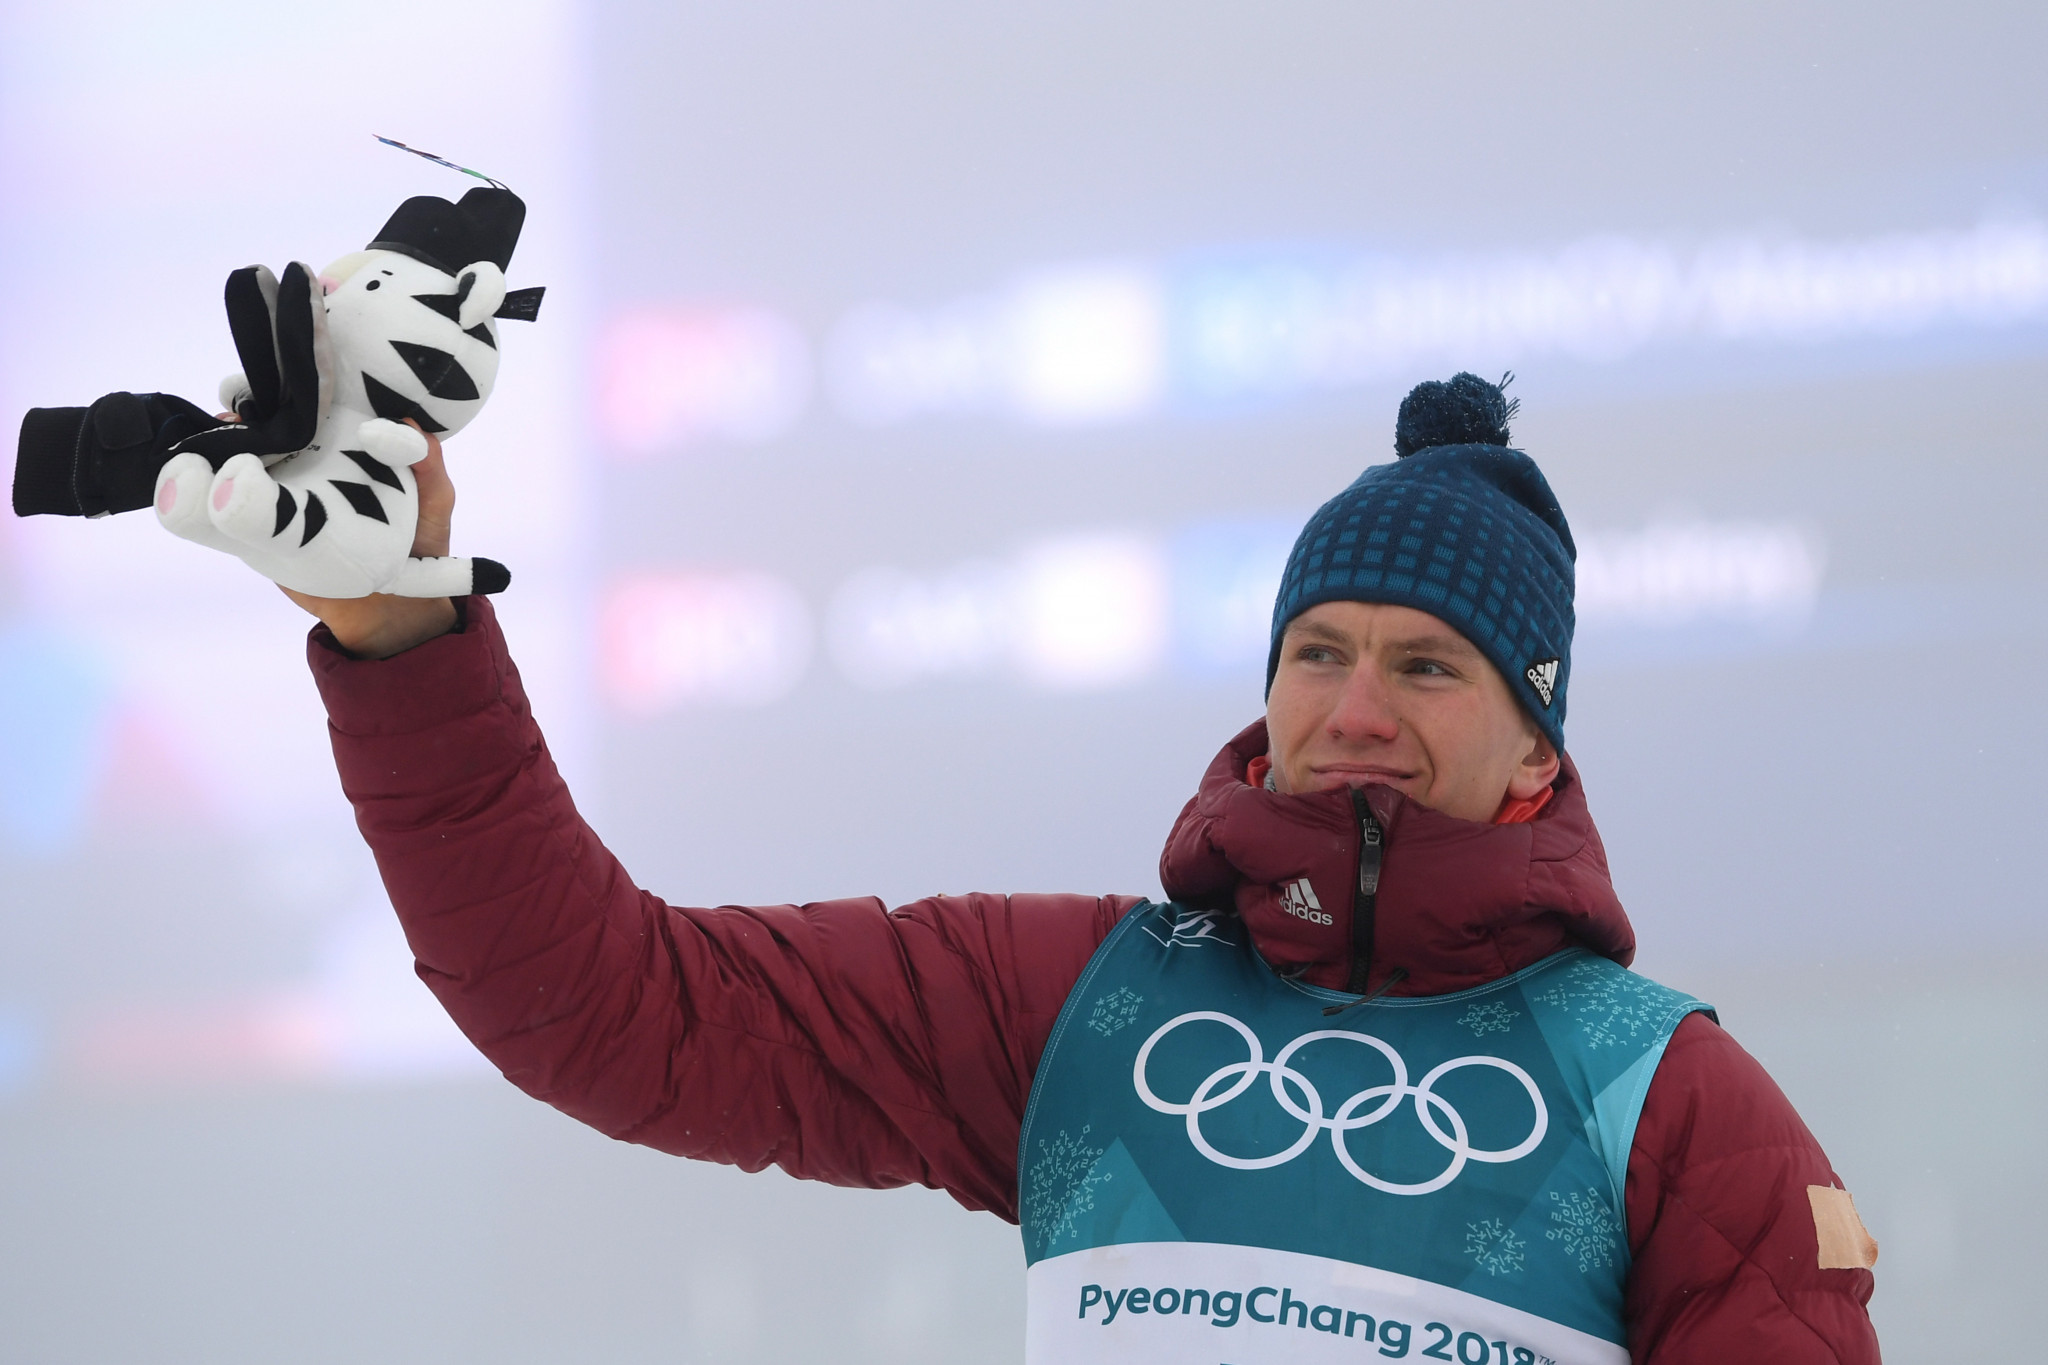 Alexander Bolshunov was one of three OAR cross-country skiing silver medal winners in Pyeongchang ©Getty Images 